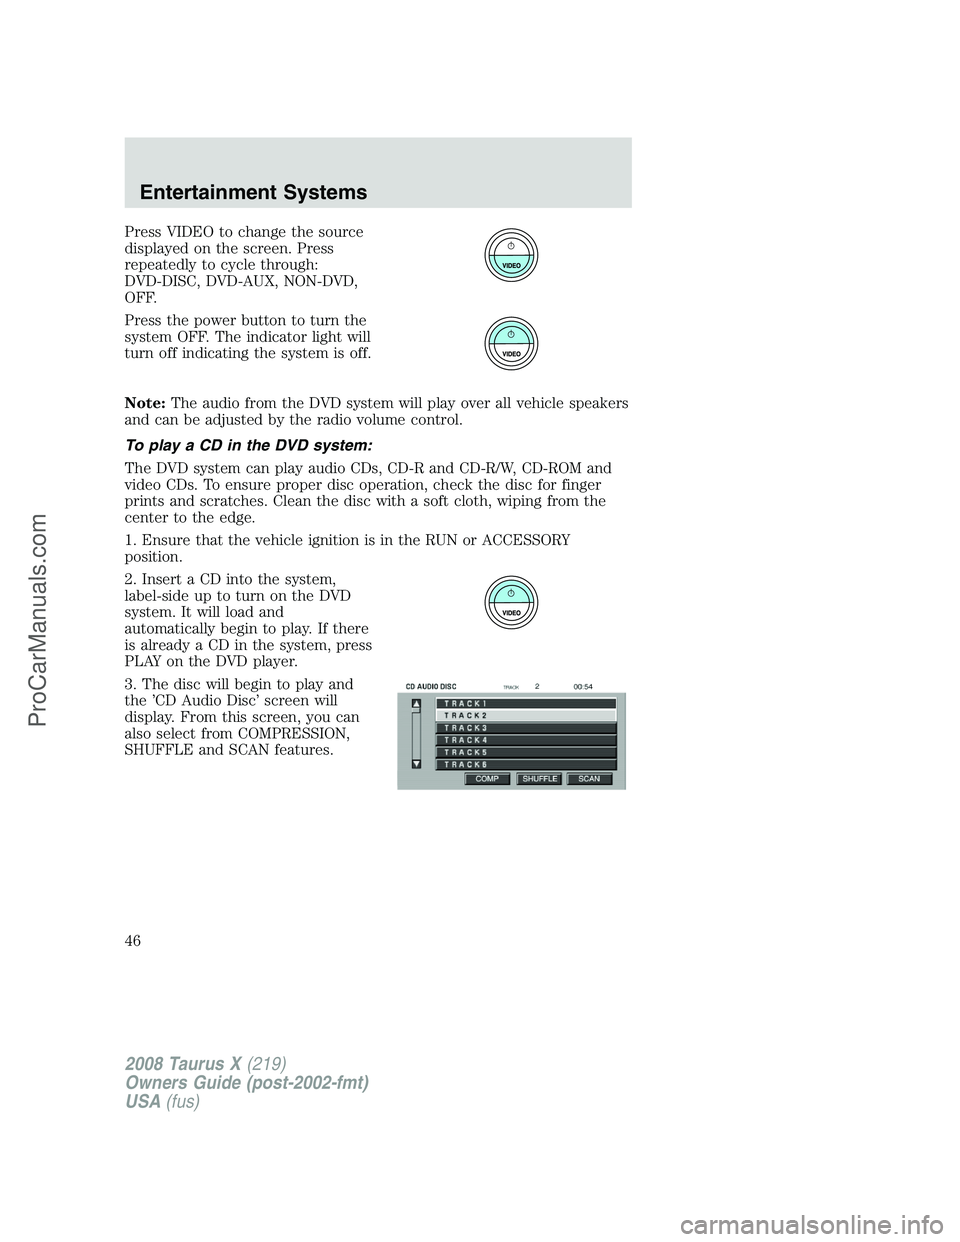 FORD FREESTYLE 2008 Service Manual Press VIDEO to change the source
displayed on the screen. Press
repeatedly to cycle through:
DVD-DISC, DVD-AUX, NON-DVD,
OFF.
Press the power button to turn the
system OFF. The indicator light will
tu